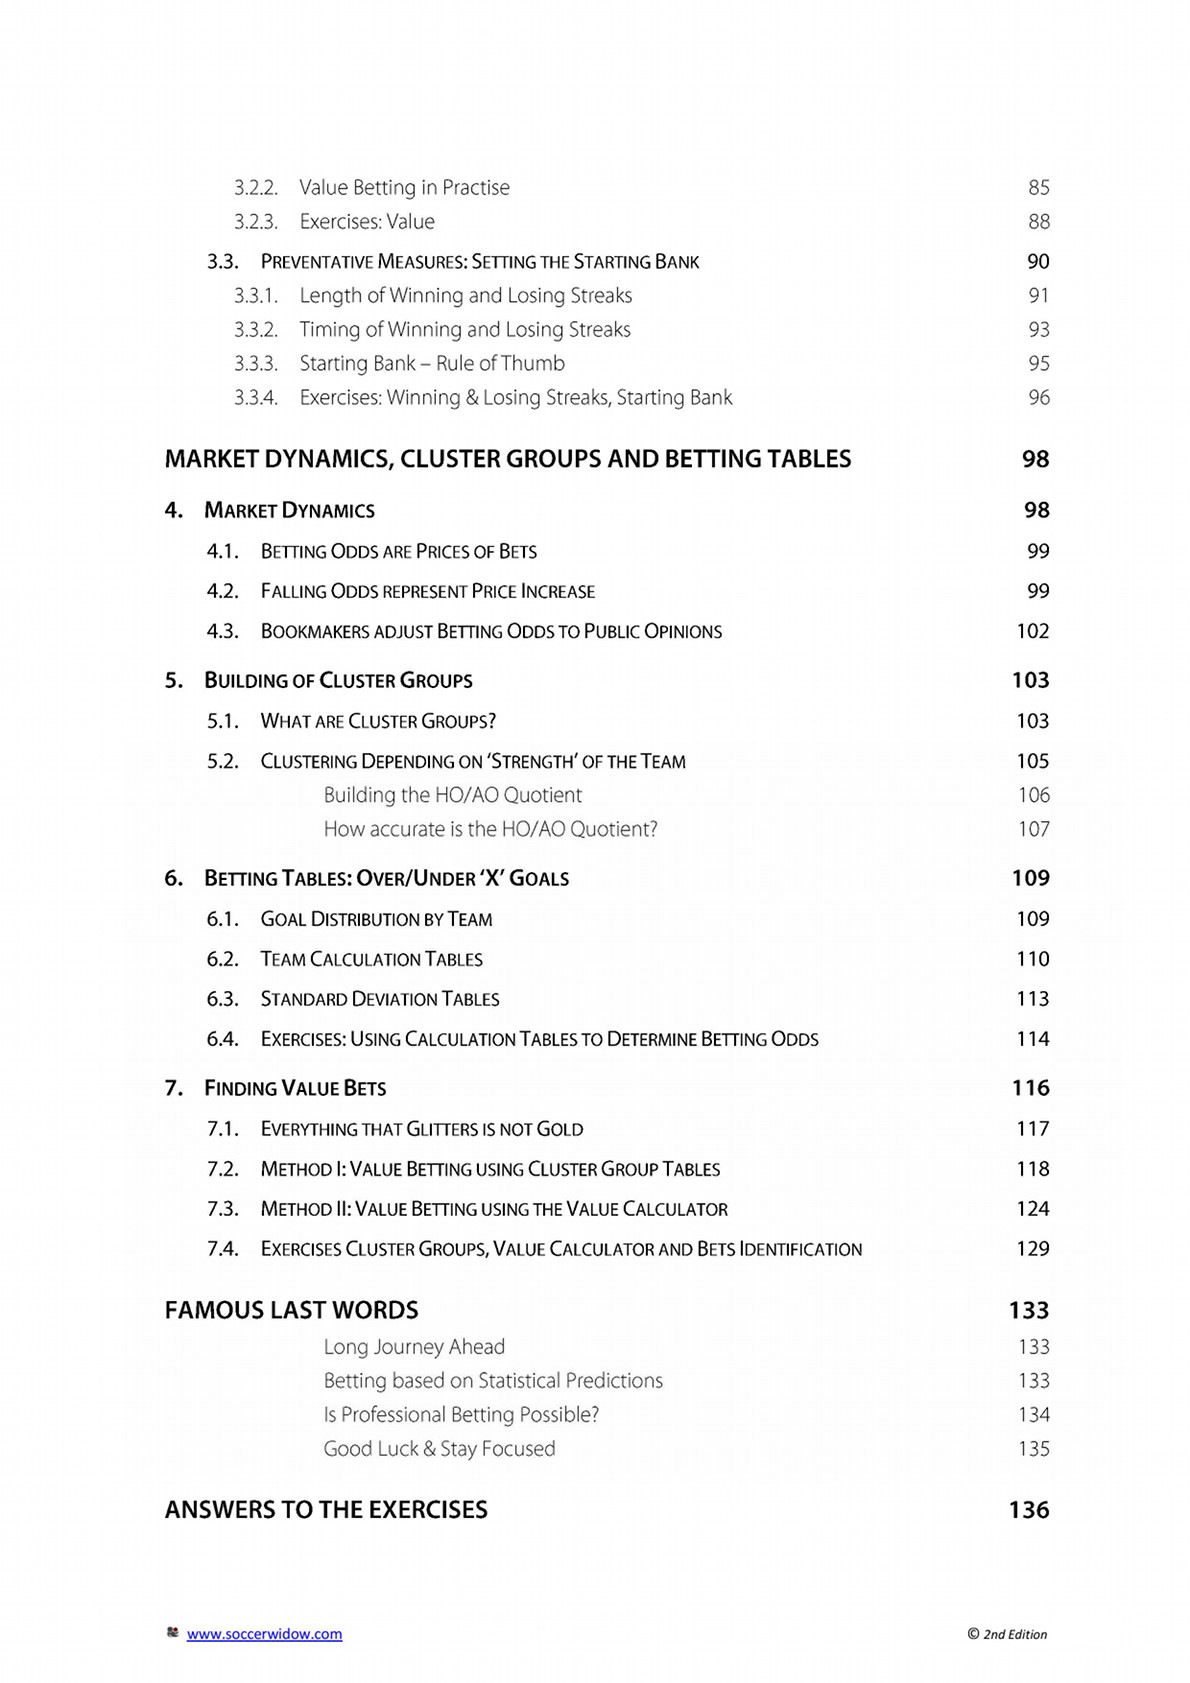 Excerpt from the course book: Betting Course Over Under - 4 - Table of Contents 003